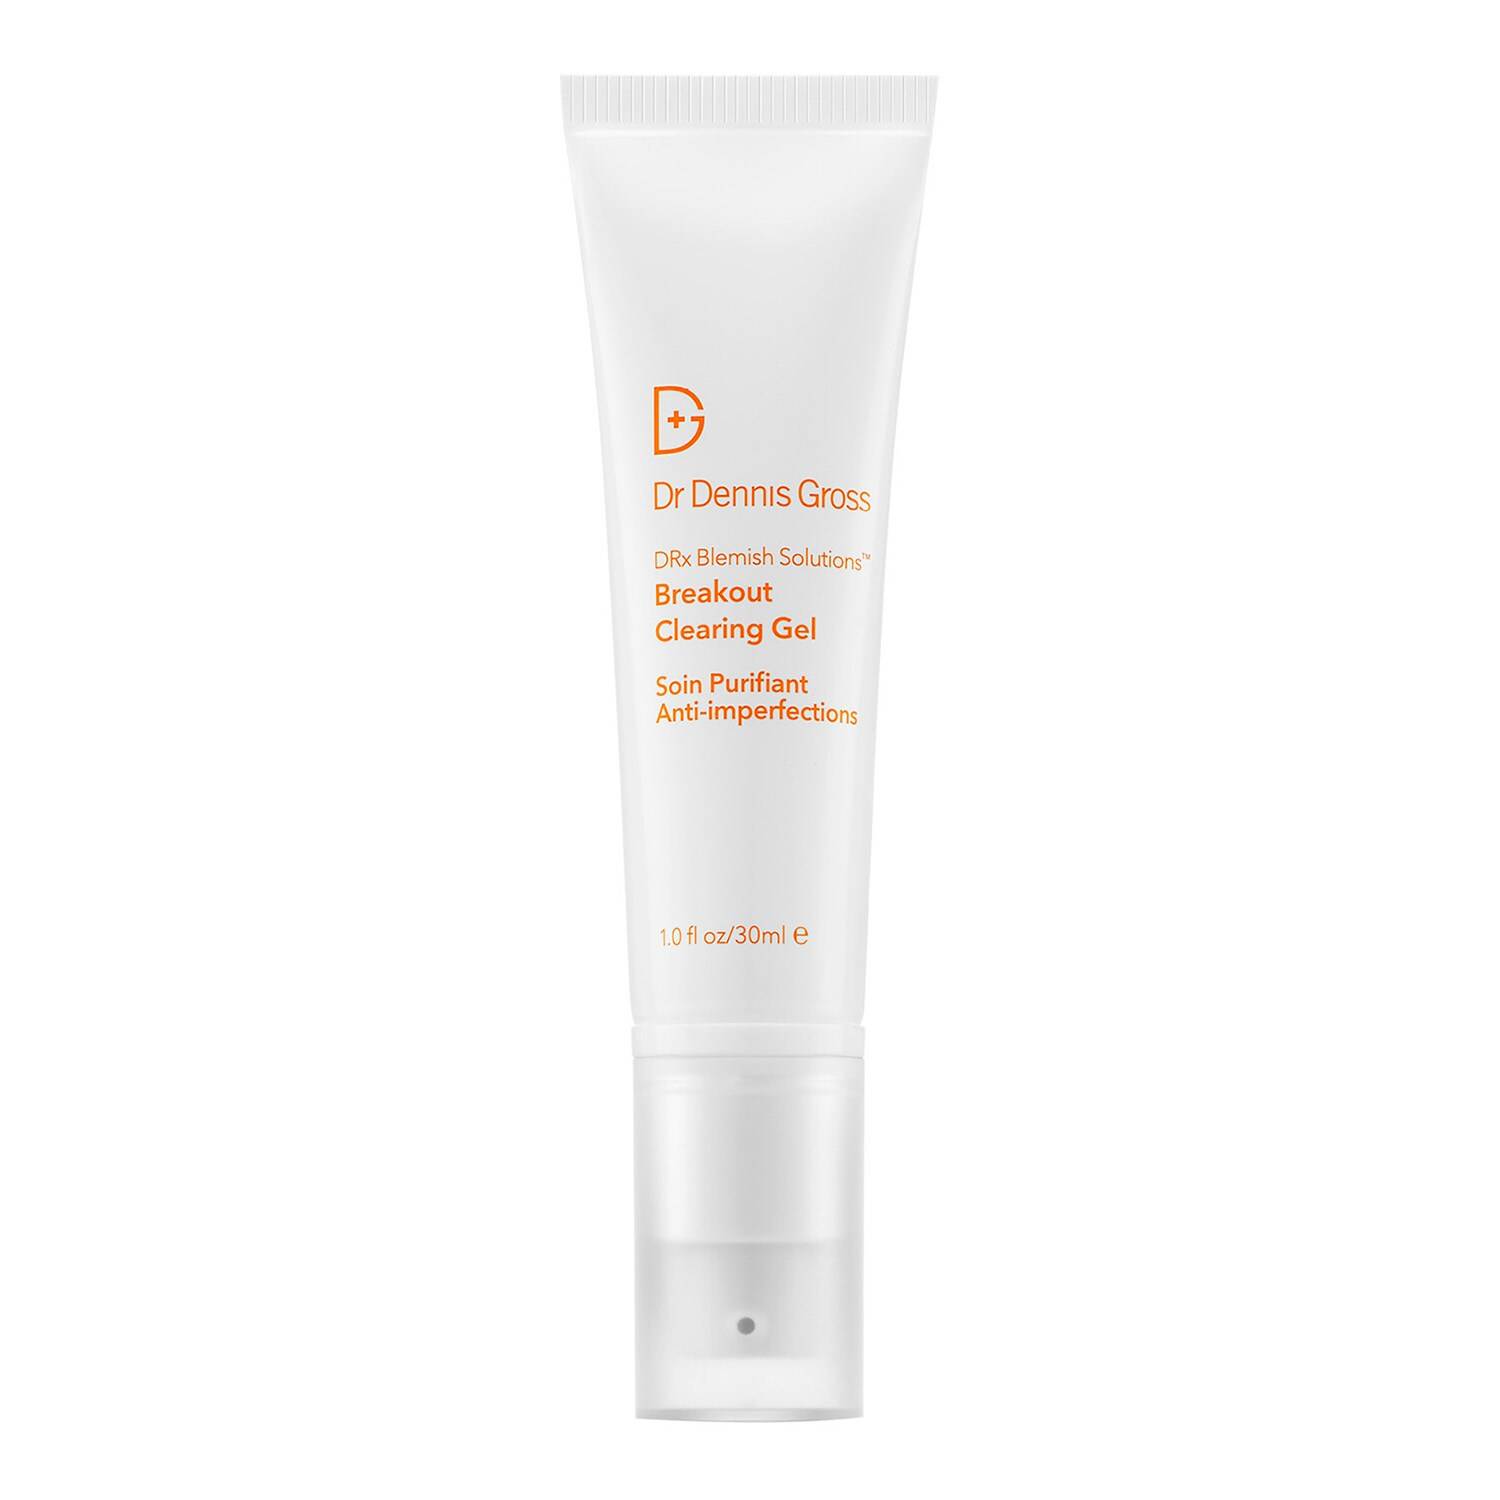 Dr Dennis Gross Drx Blemish Solutions Breakout Clearing Gel 30Ml